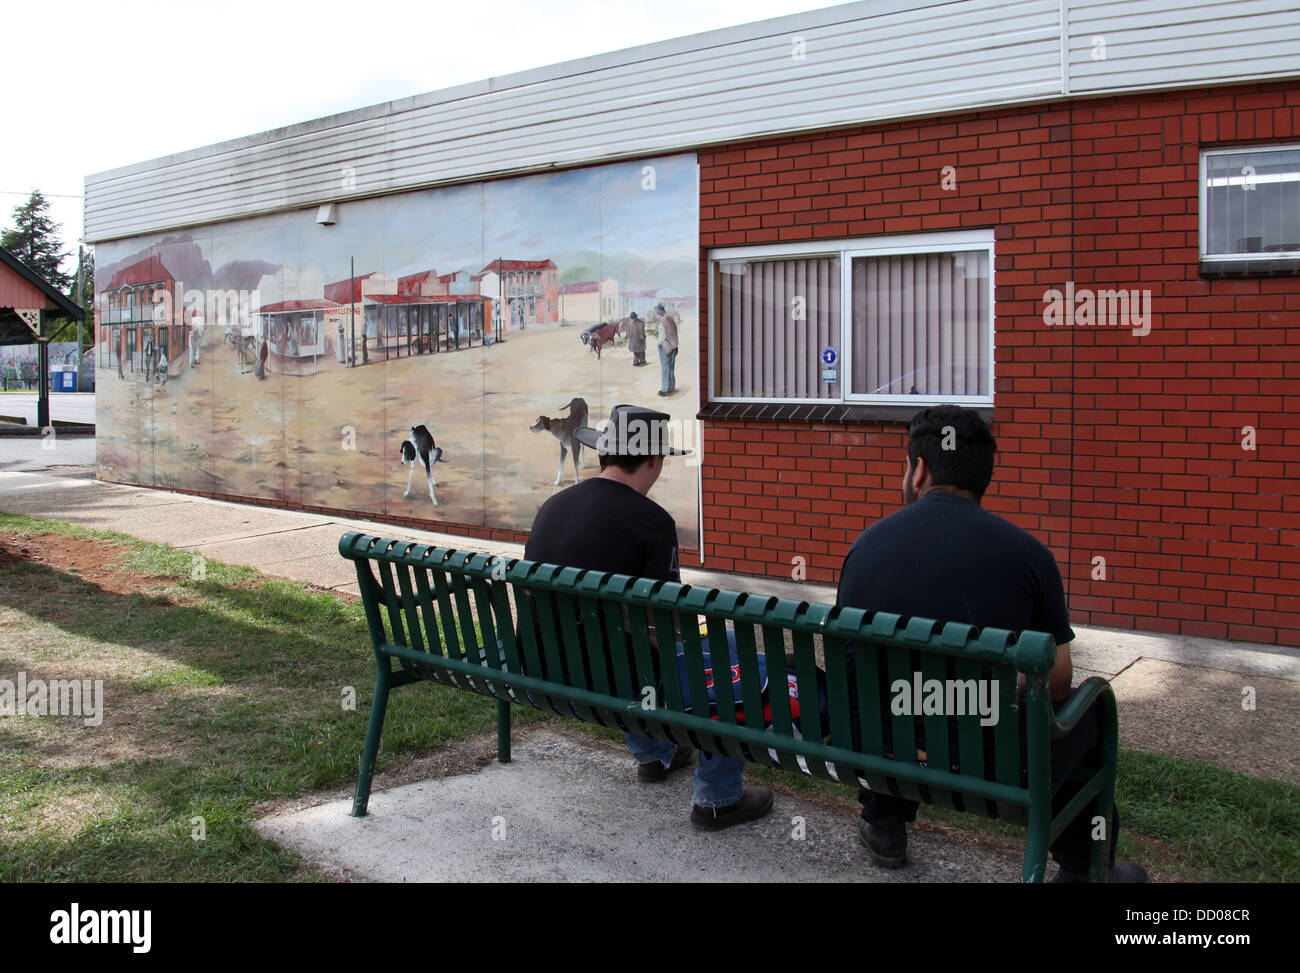 Mural in the Tasmanian town of Sheffield with two men sitting on a public seat Stock Photo